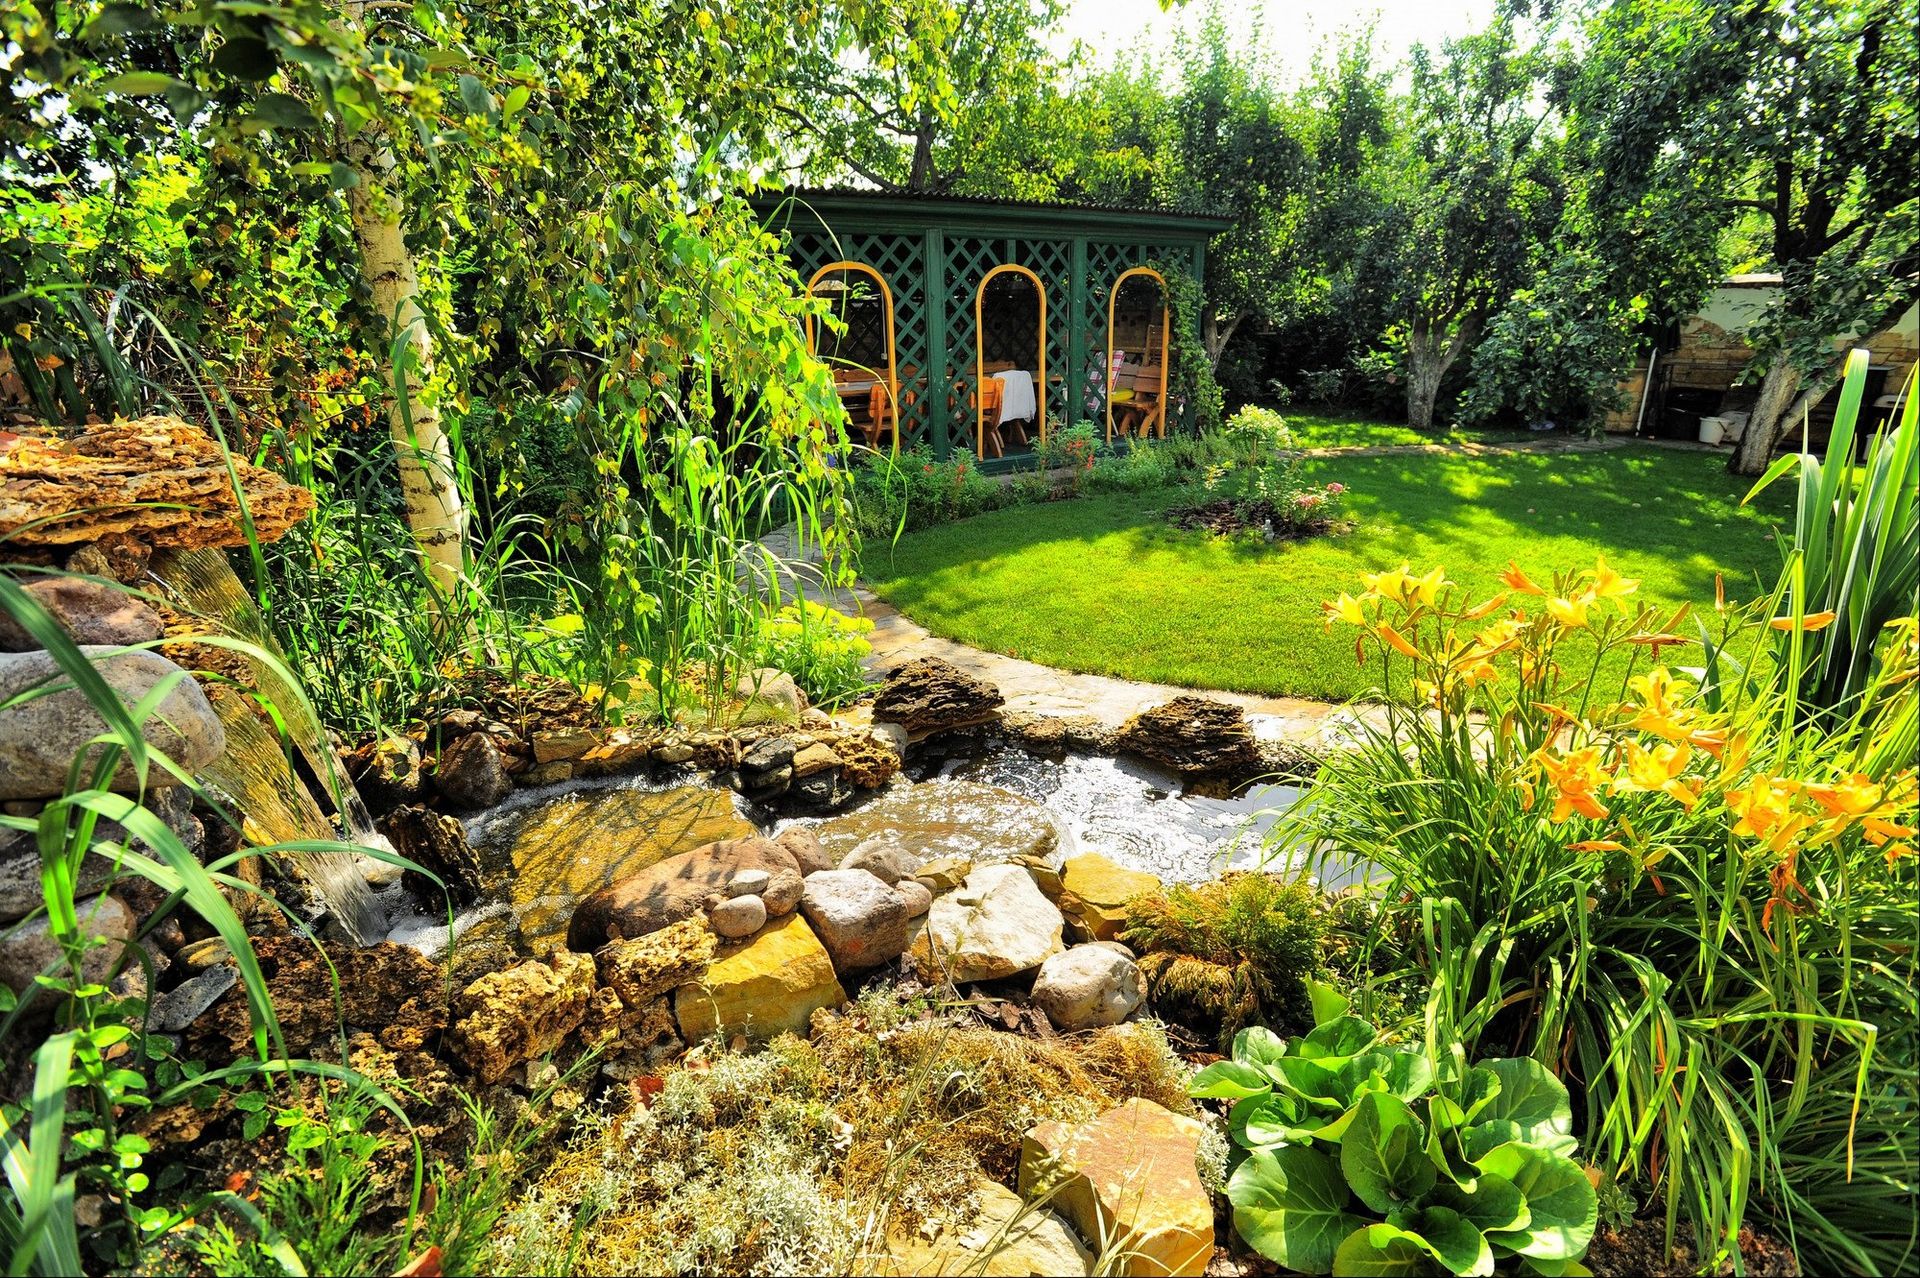 secluded garden area with summer house and waterfall